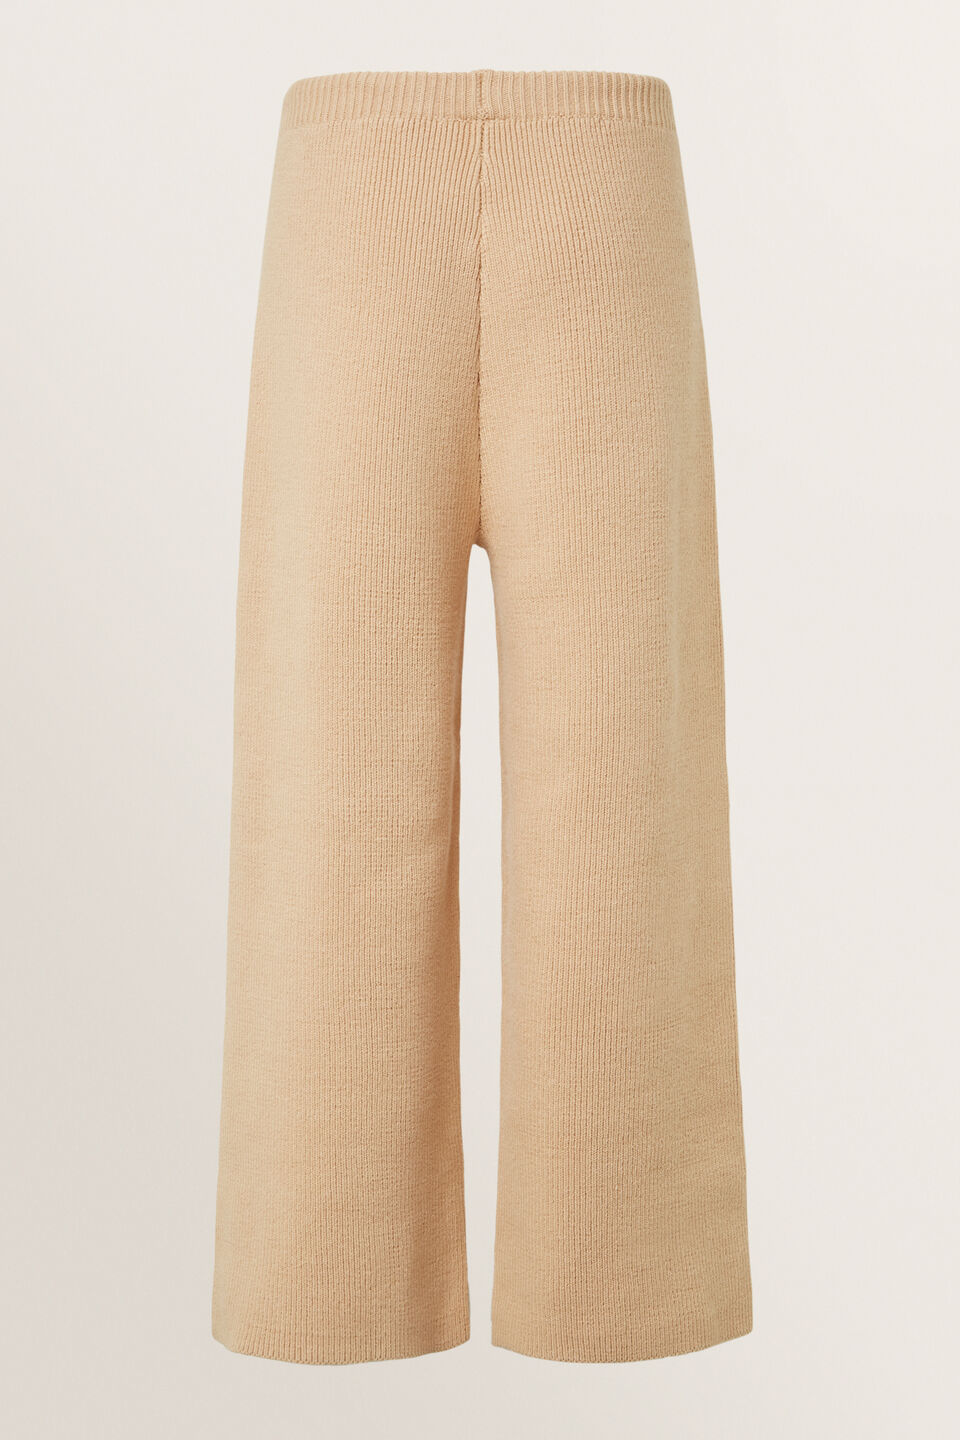 Knit Pant  Cappuccino